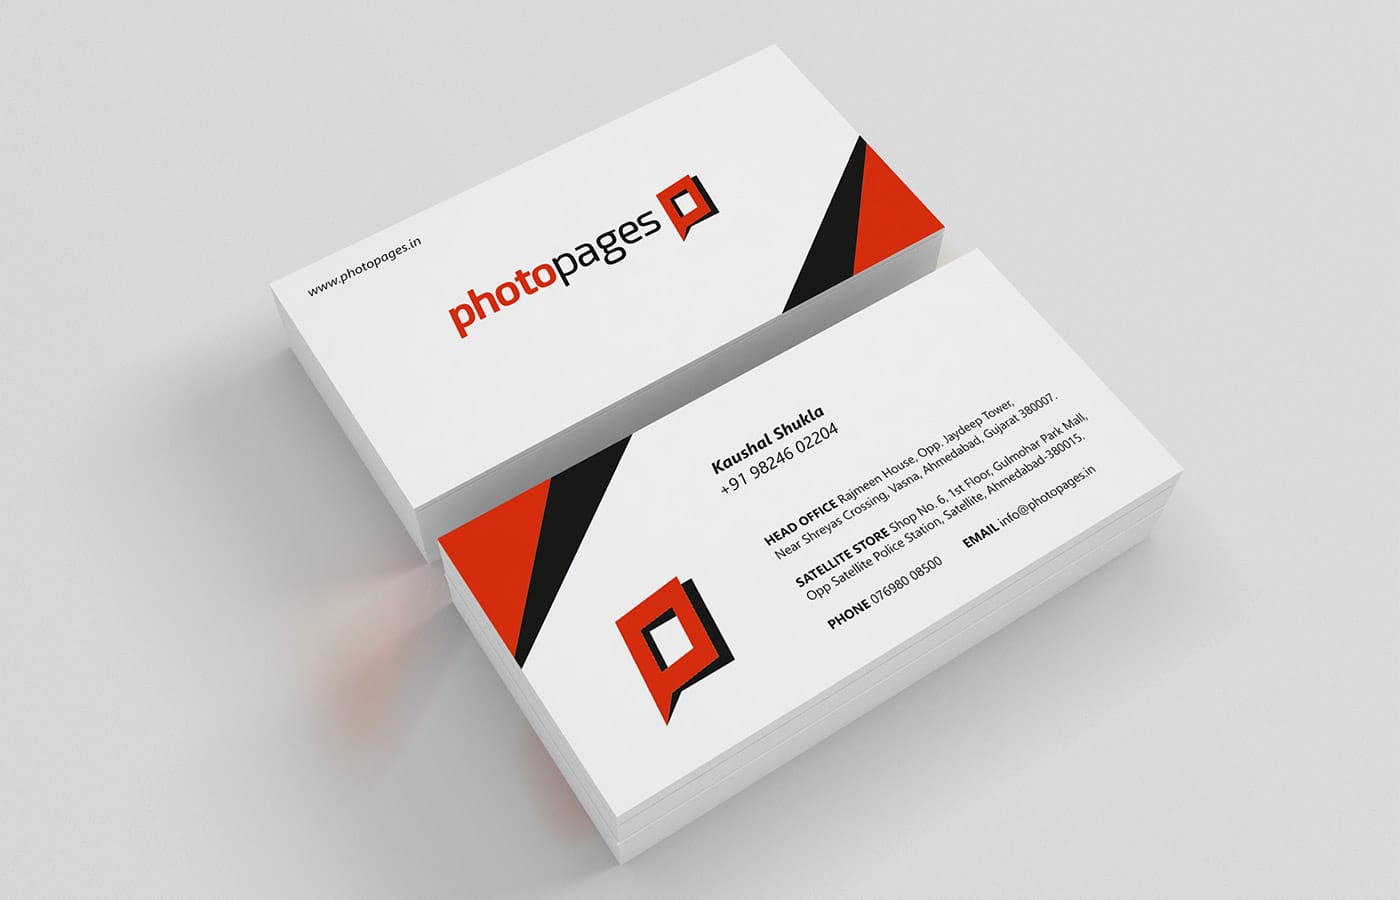 Photopages